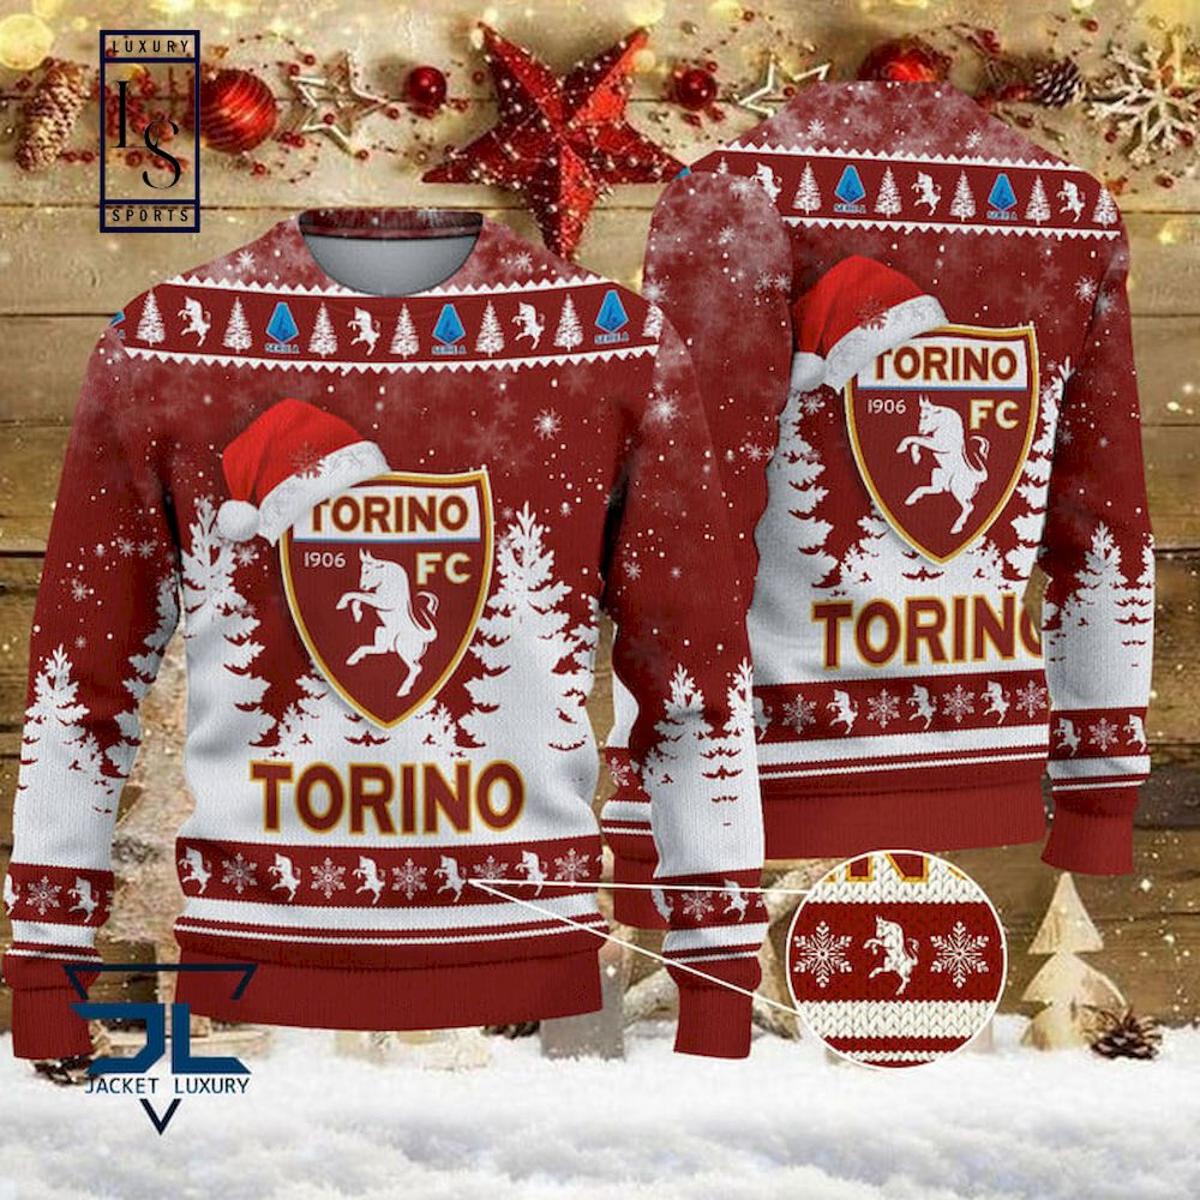 Torino Fc The Bull Red Version Ugly Christmas Sweater For Fans